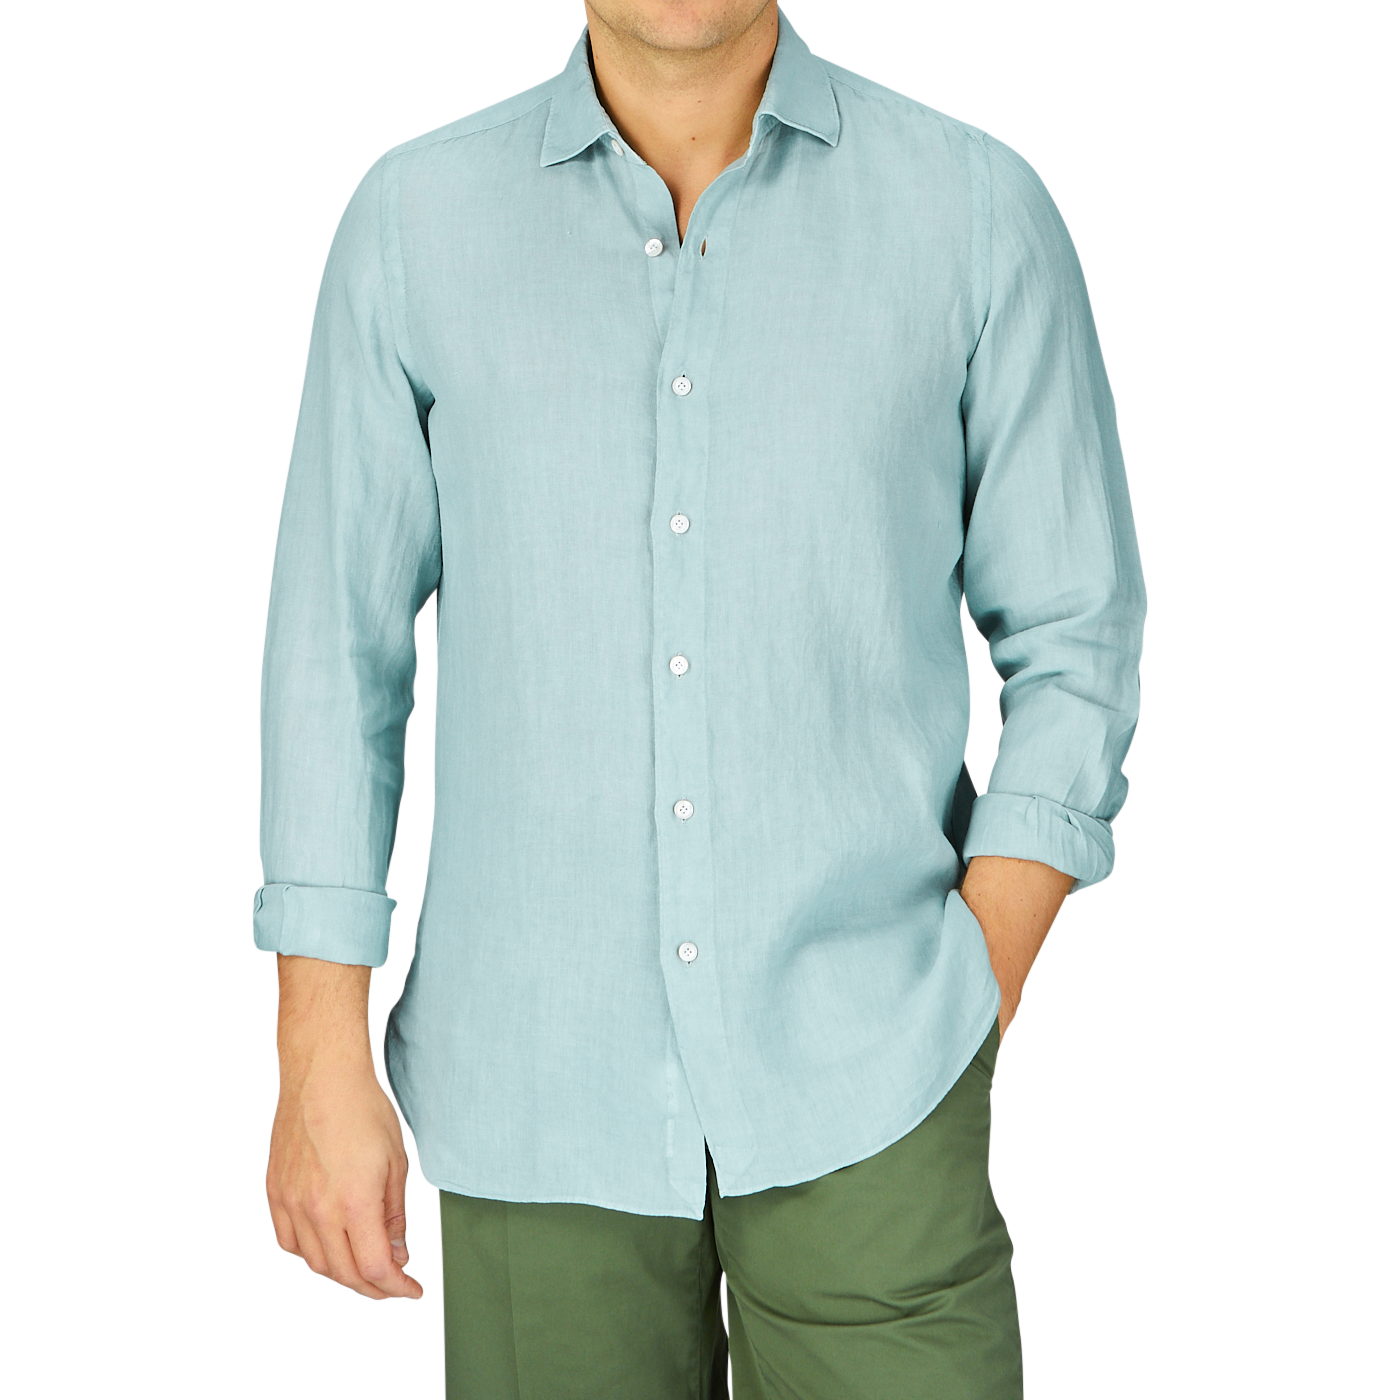 Man wearing a Sage Green Linen Casual Shirt from Finamore and olive pants against a plain background.